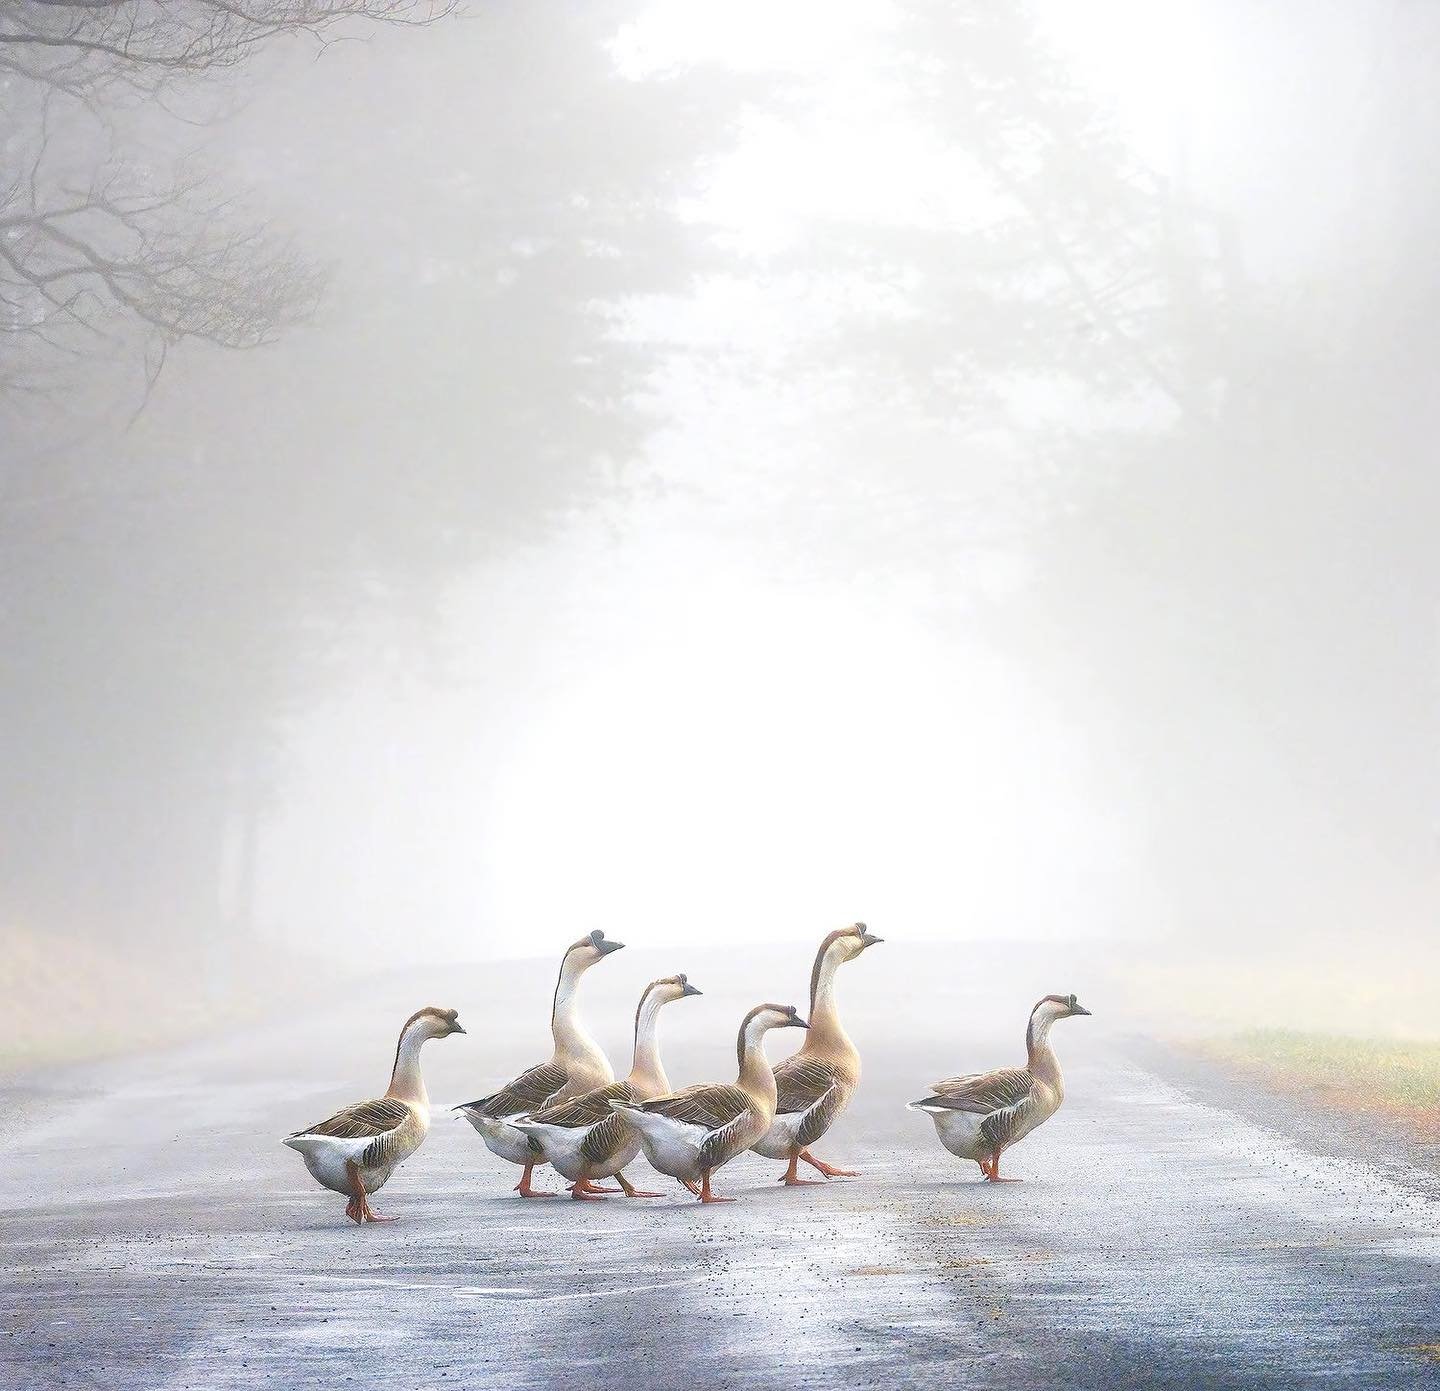 Ducks for a rainy @mainstreetartsfest day 3 (although technically I think these are geese). This is one of my new photographs available at the show and on my website, I photographed these friends strolling on a foggy spring morning. I&rsquo;m in boot